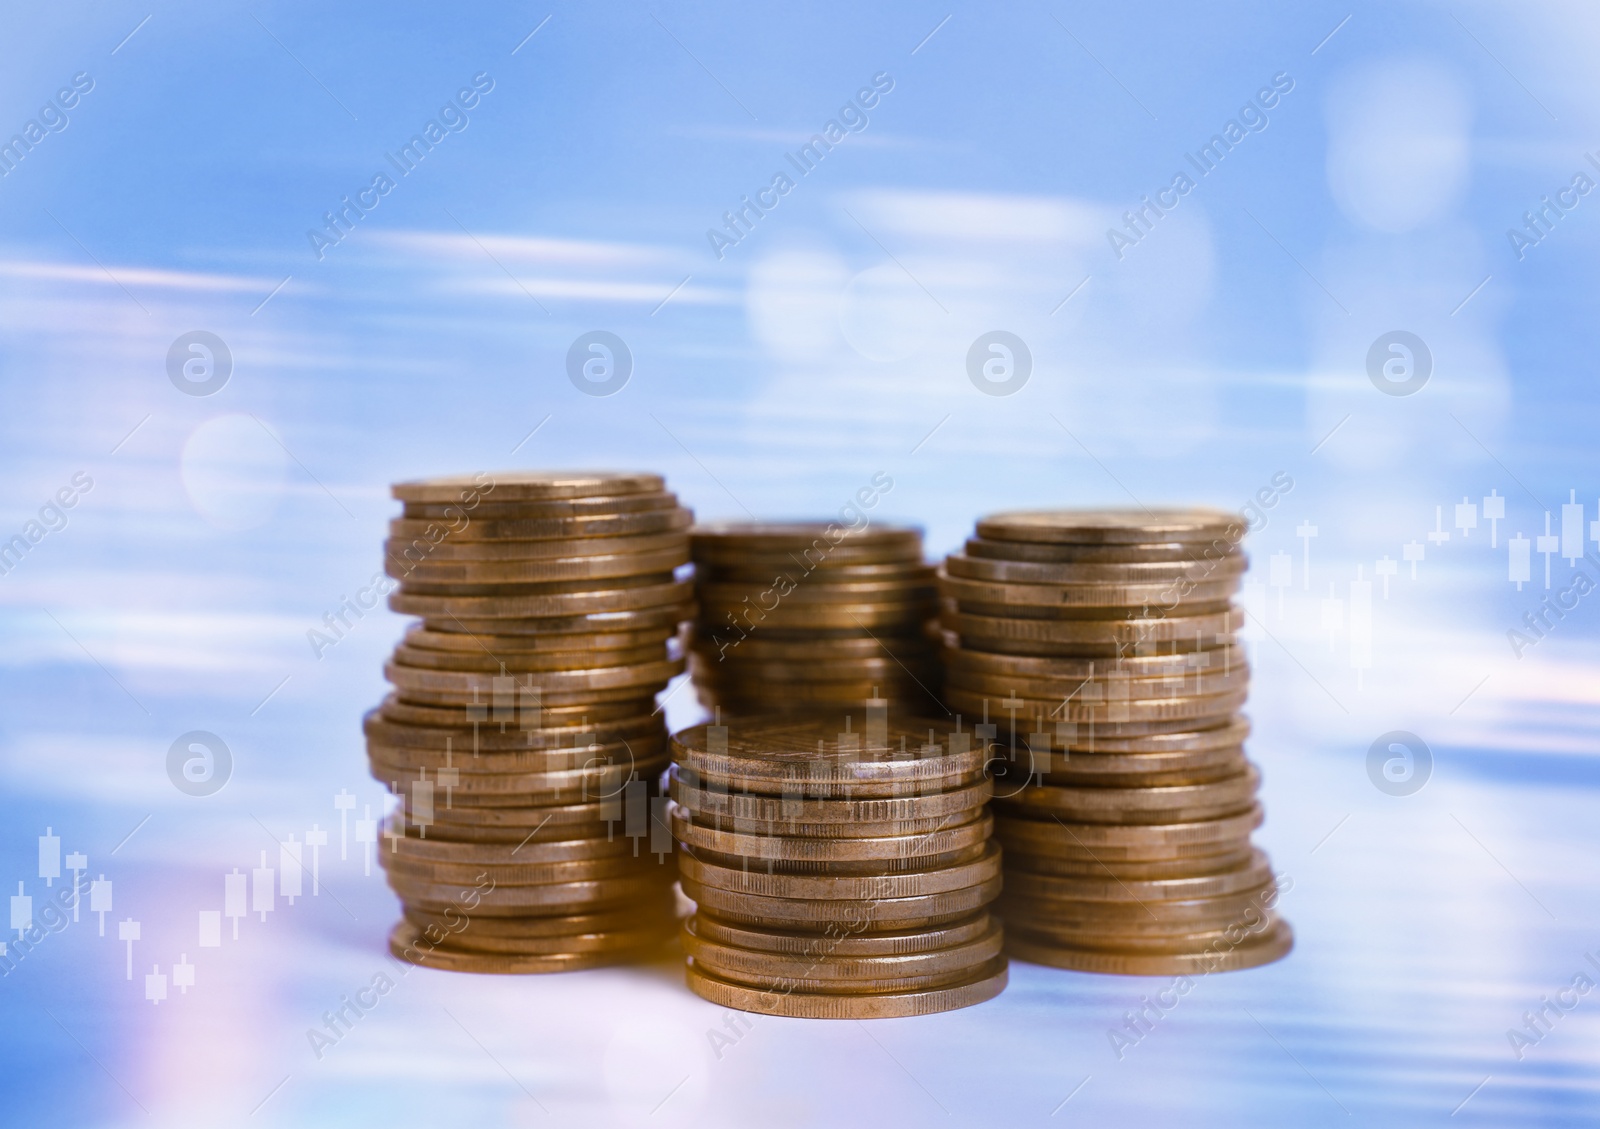 Image of Stacked coins and charts on light blue background